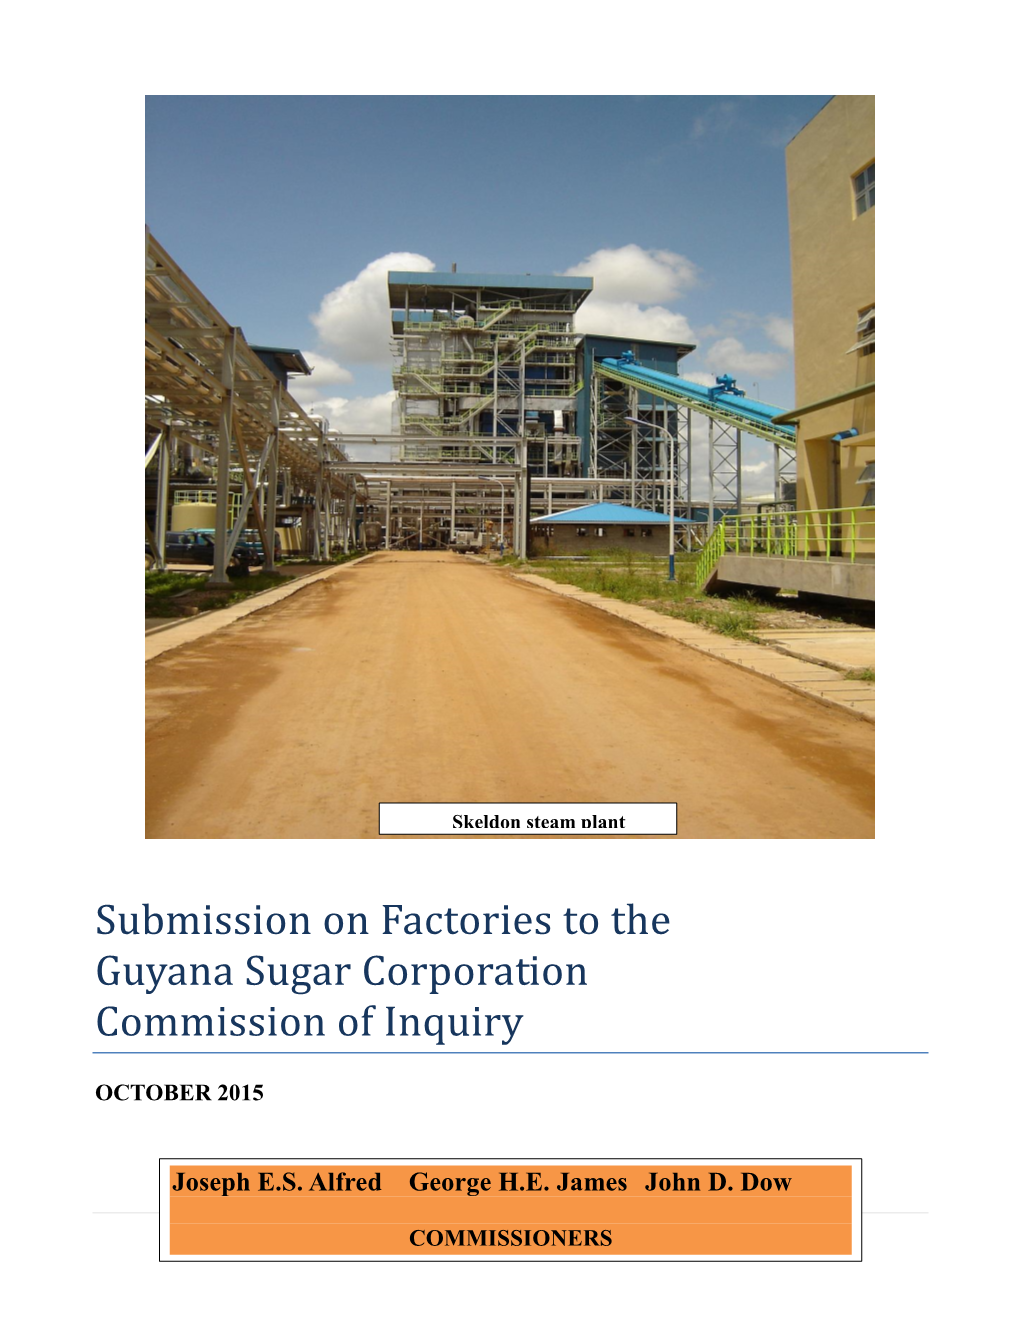 Submission on Factories to the Guyana Sugar Corporation Commission of Inquiry